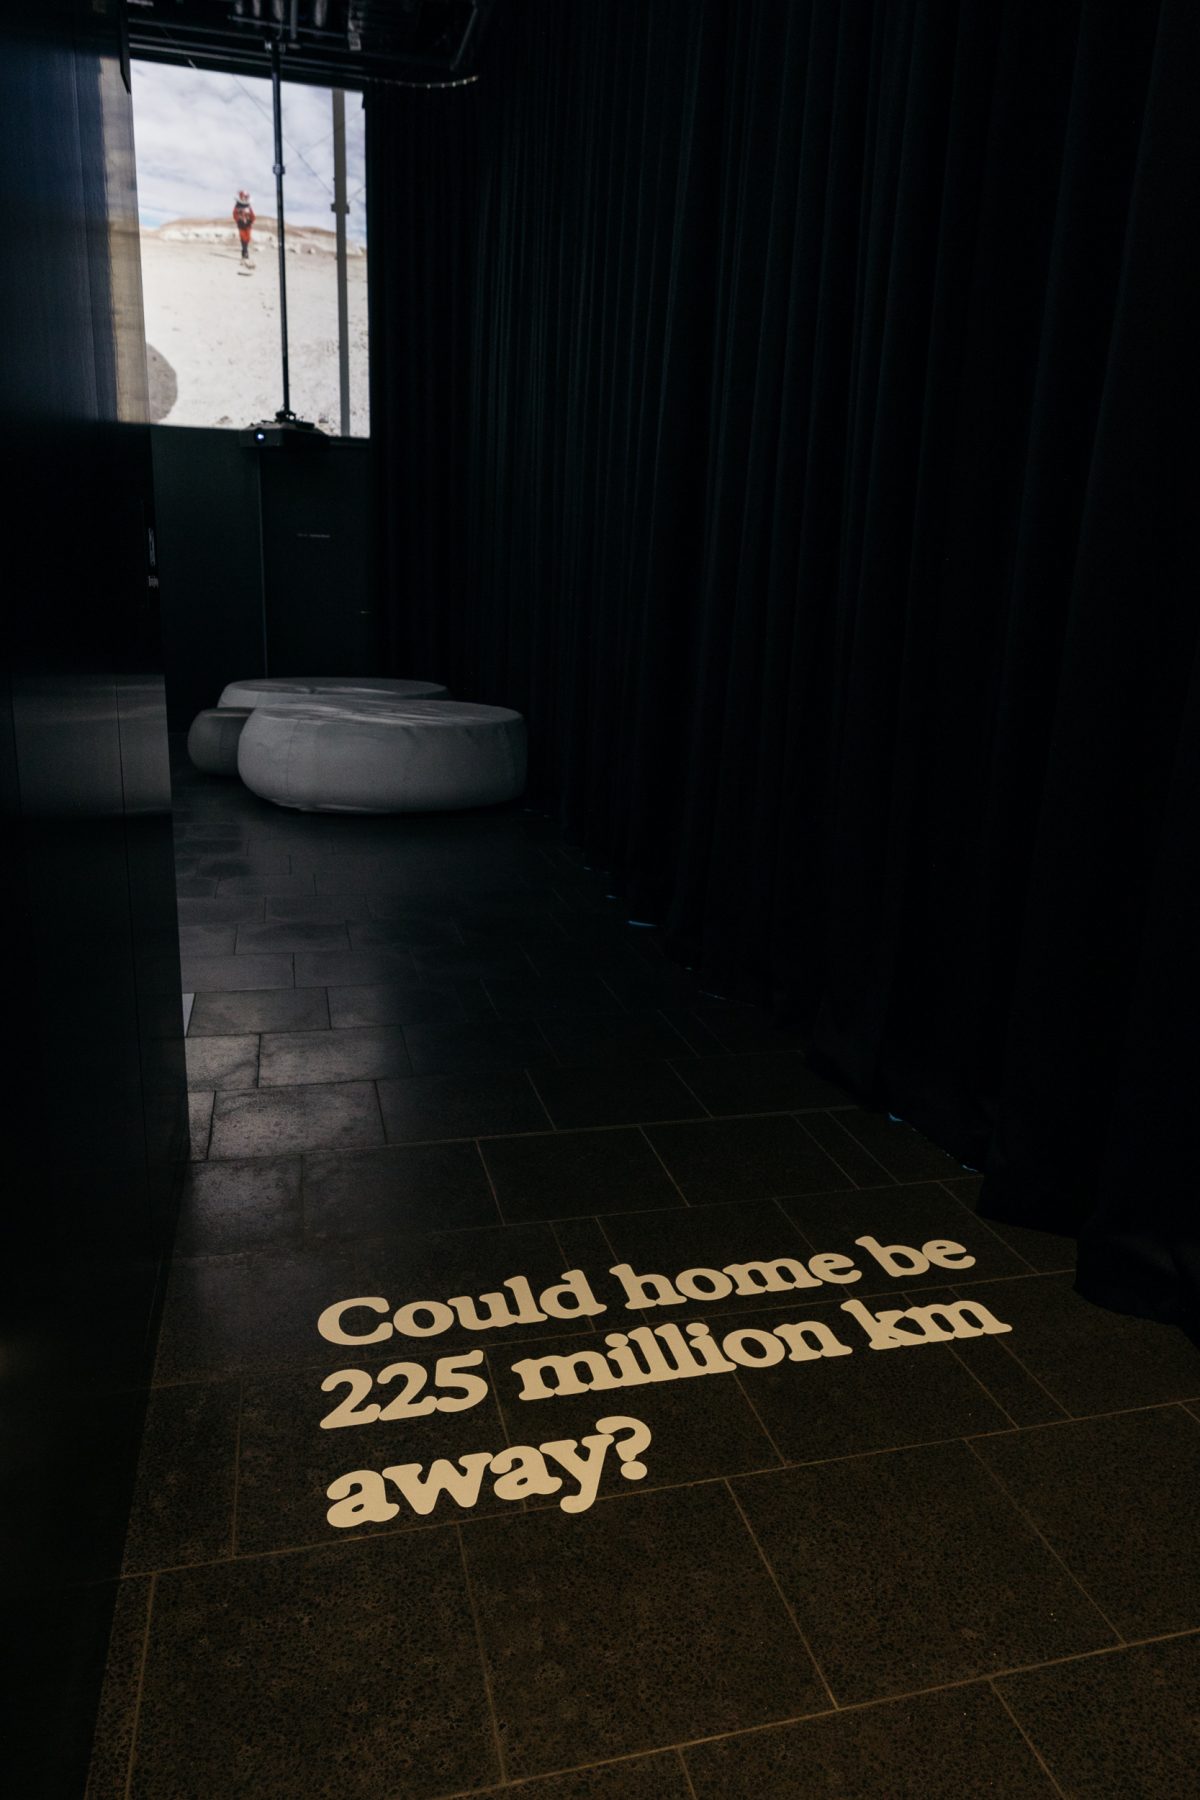 Text on floor of gallery reads 'Could home be 250million km away?'